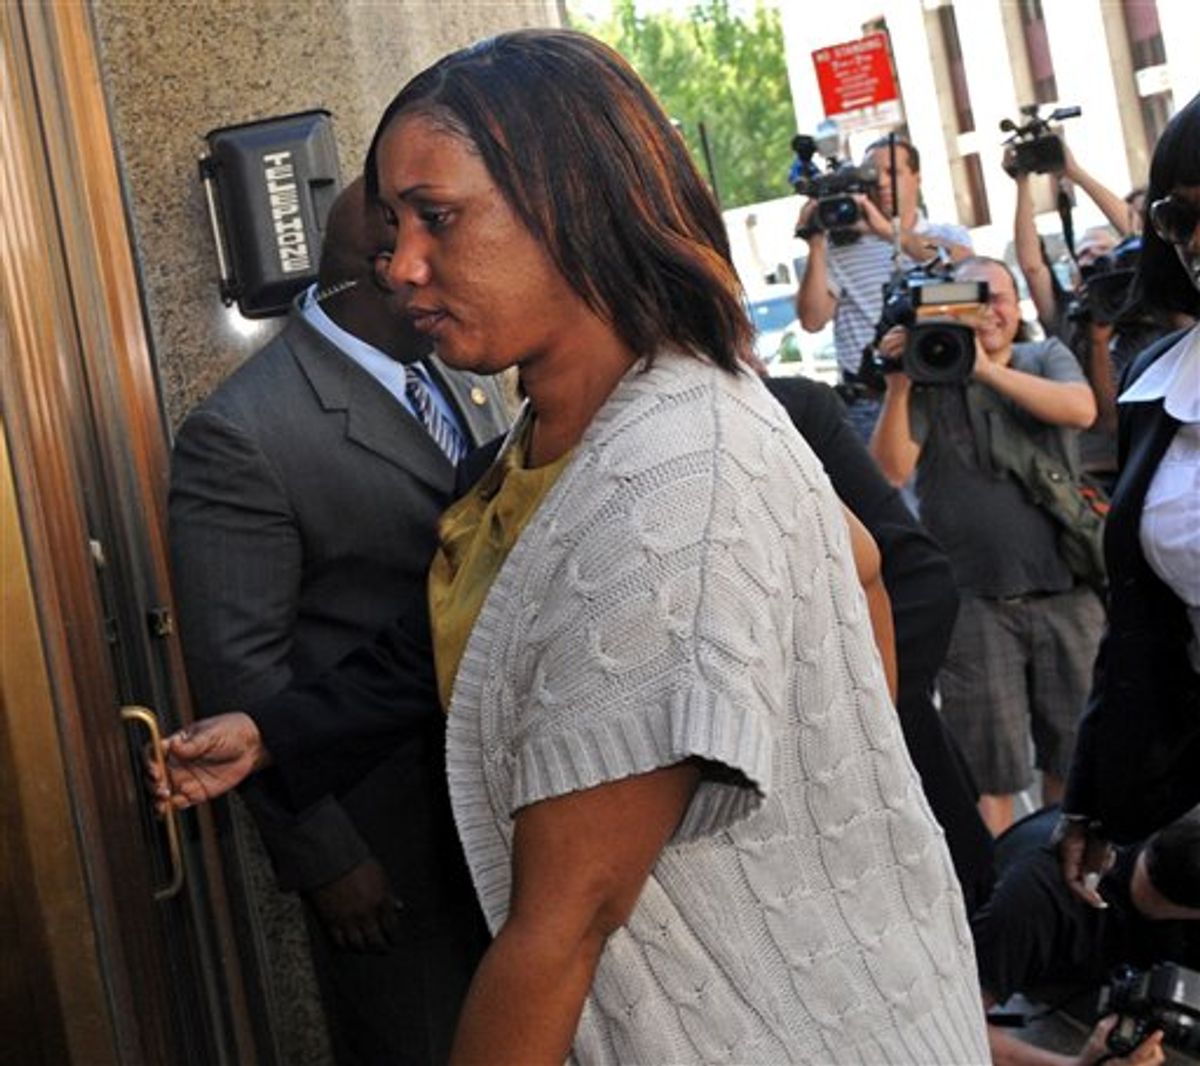 Hotel maid Nafissatou Diallo arrives at Manhattan criminal court for a meeting with New York City prosecutors investigating the sex assault case against Dominique Strauss-Kahn Wednesday, July 27, 2011, in New York. Diallo broke her silence in recent days with interviews in Newsweek and on a series of ABC News programs.  (AP Photo/ Louis Lanzano) (AP)